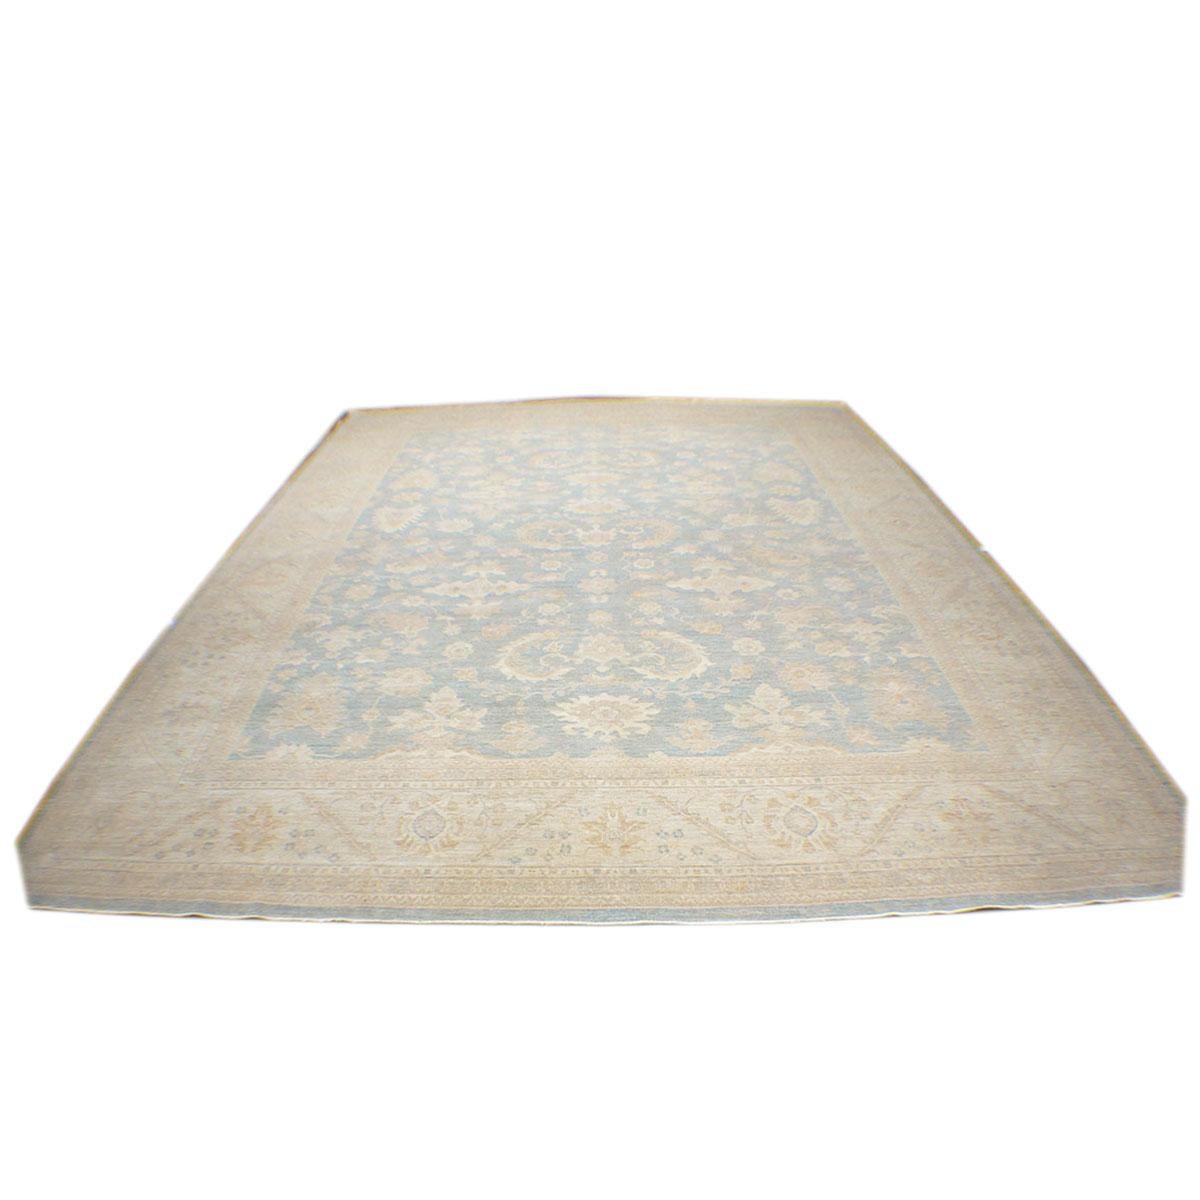 Ashly Fine Rugs presents this beautiful 12x15 Afghan Oushak. As part of our own previous production, this piece was thought of and created in-house and handmade in Afghanistan by our master weavers. This elegant piece has a light blue background,